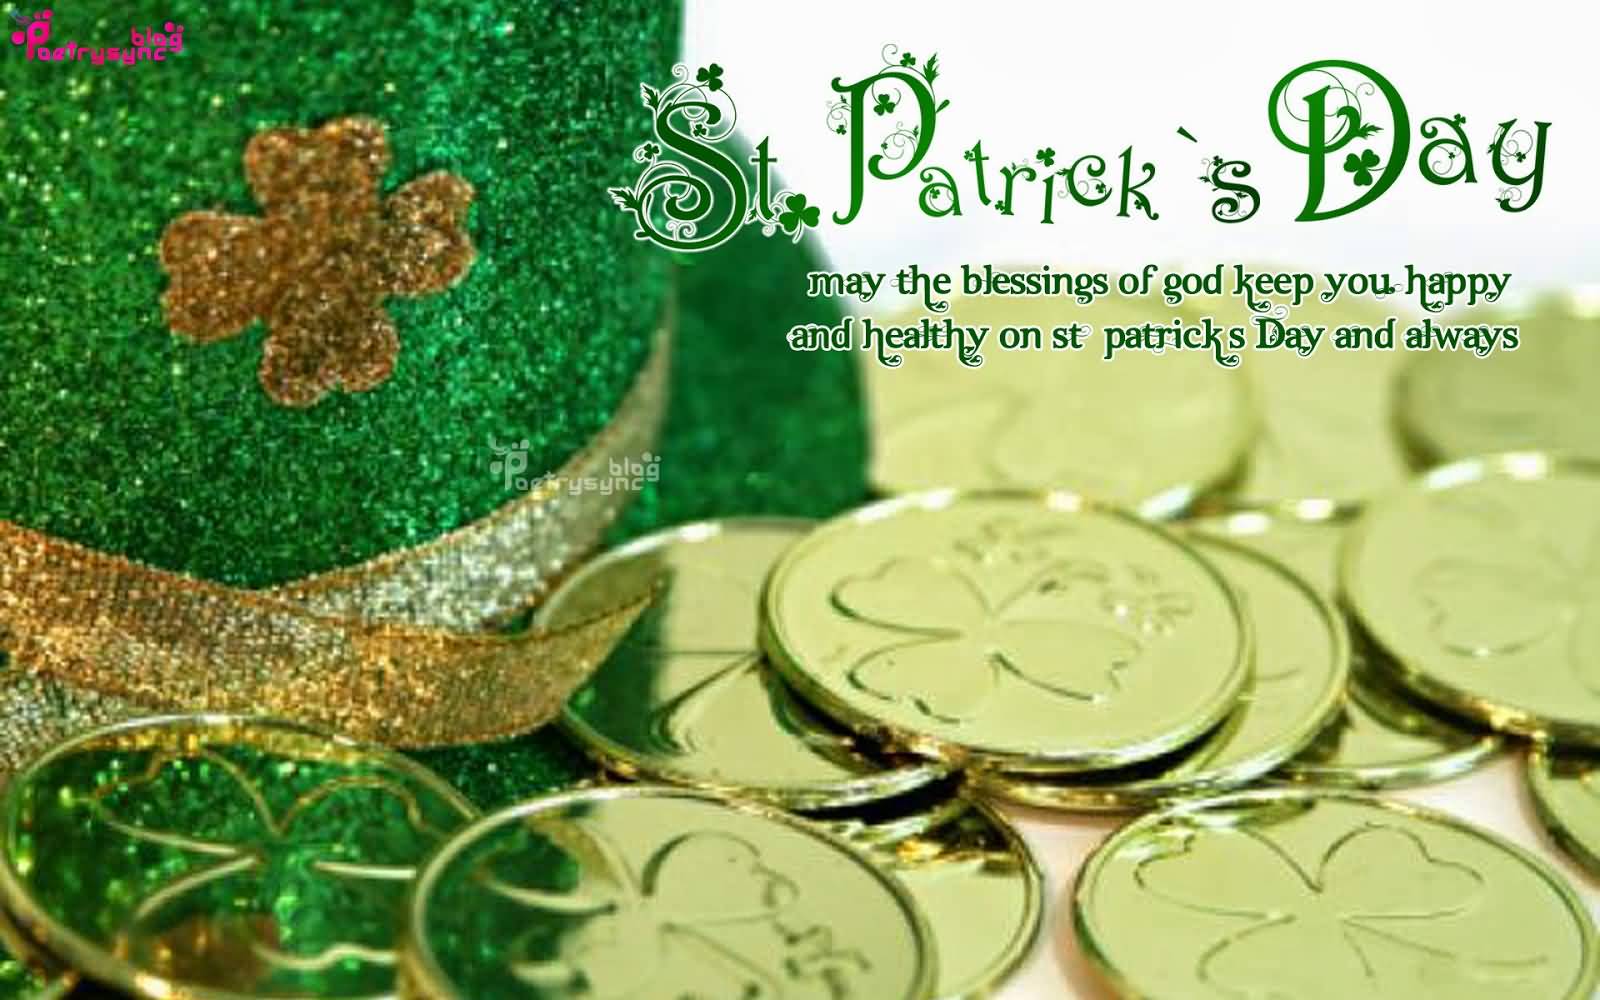 Saint Patrick's Day May The Blessings Of God Keep You Happy And Healthy On Saint Patrick's Day And Always